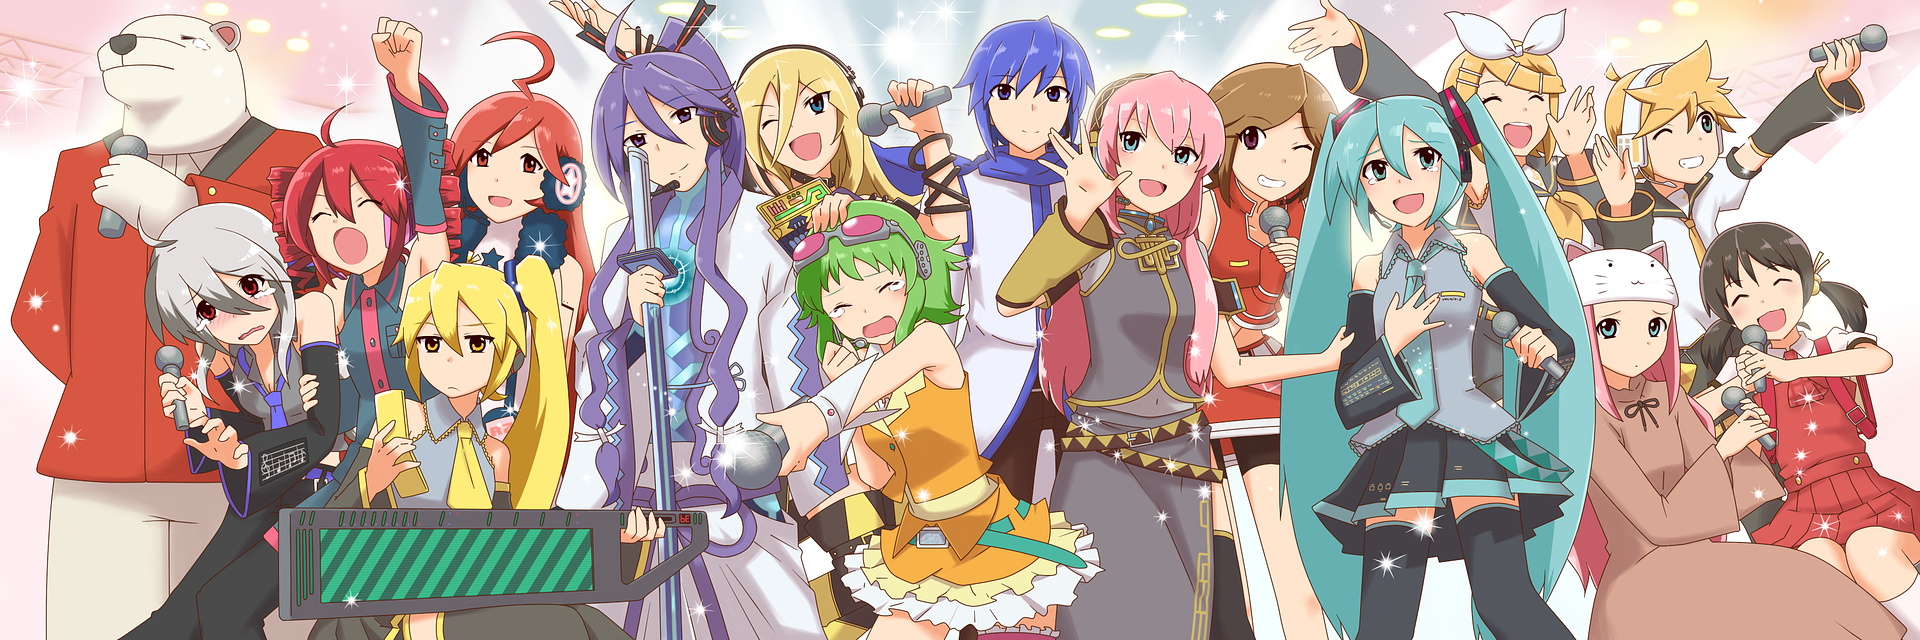 Vocaloid And Utau Rp Group (40 users) | Gaia Guilds | Gaia Online